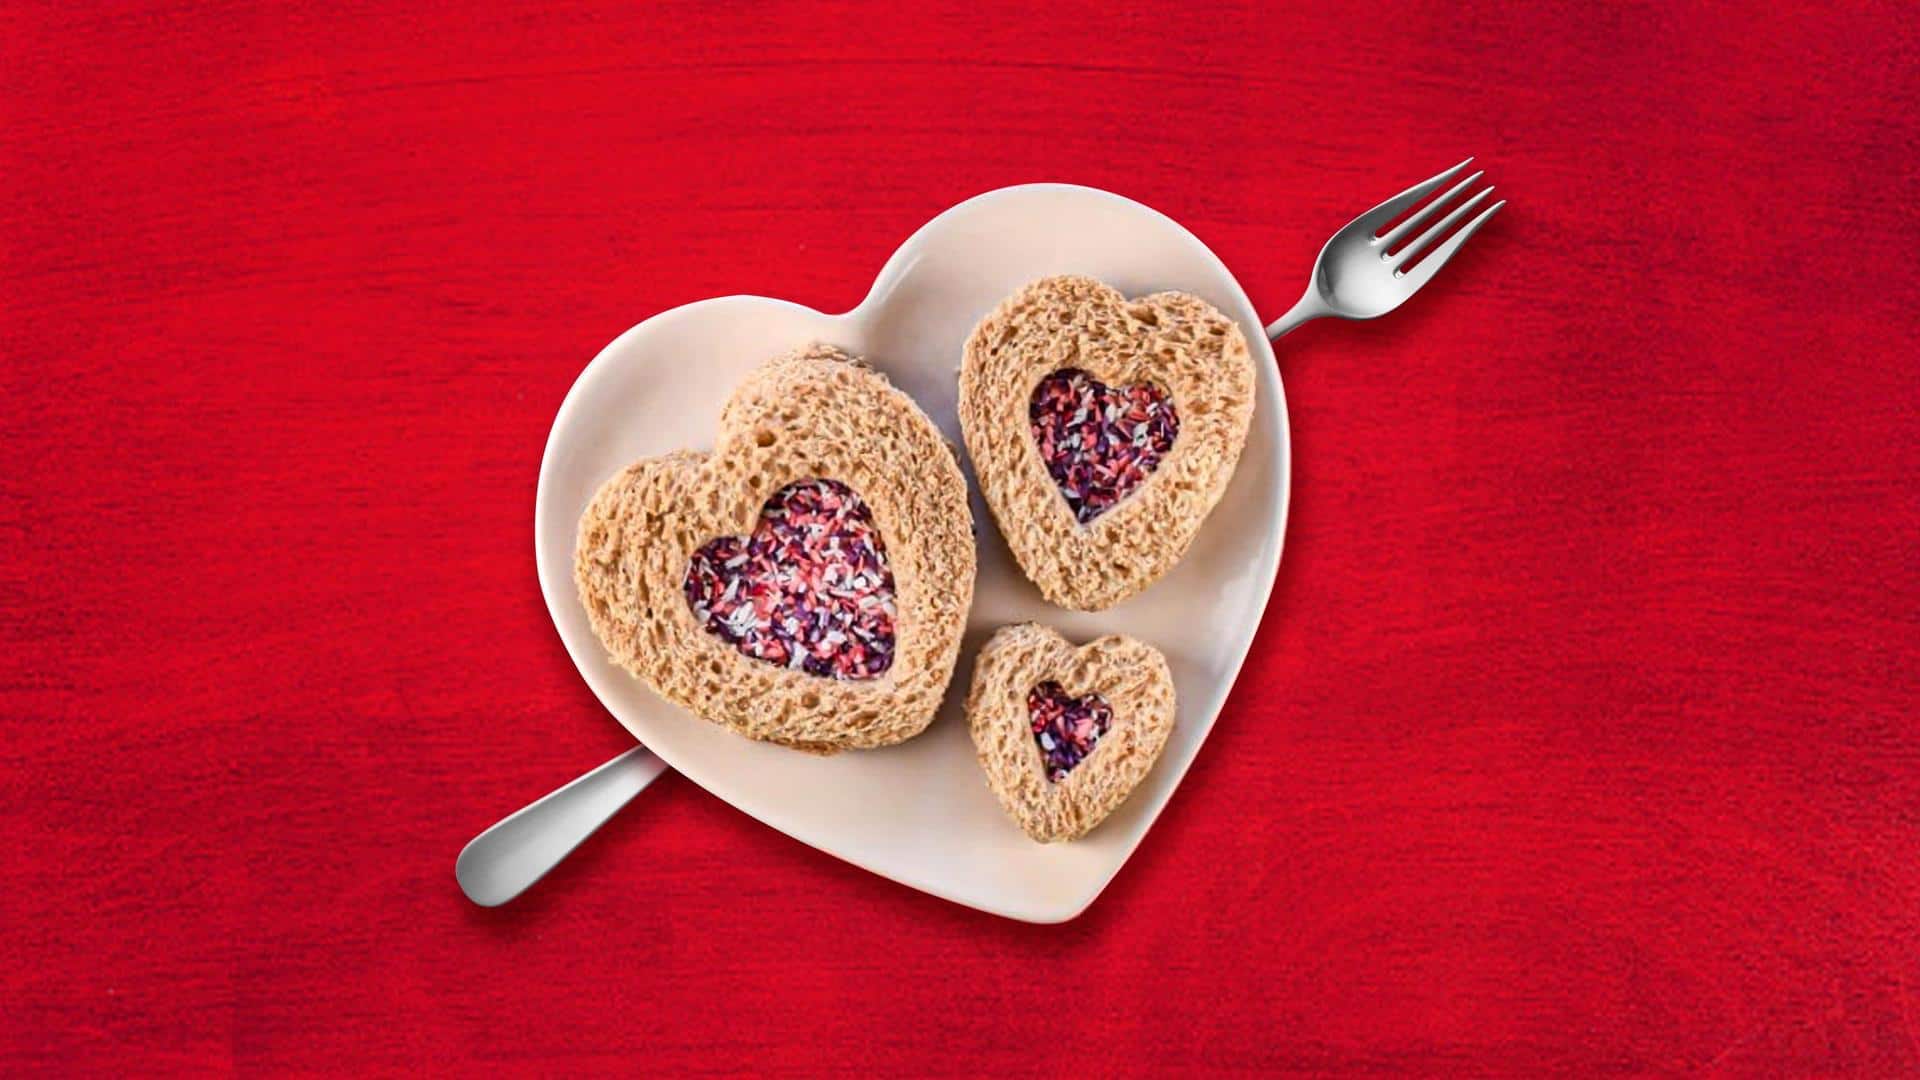 This Valentine's Day spread the love with heart-shaped sandwiches